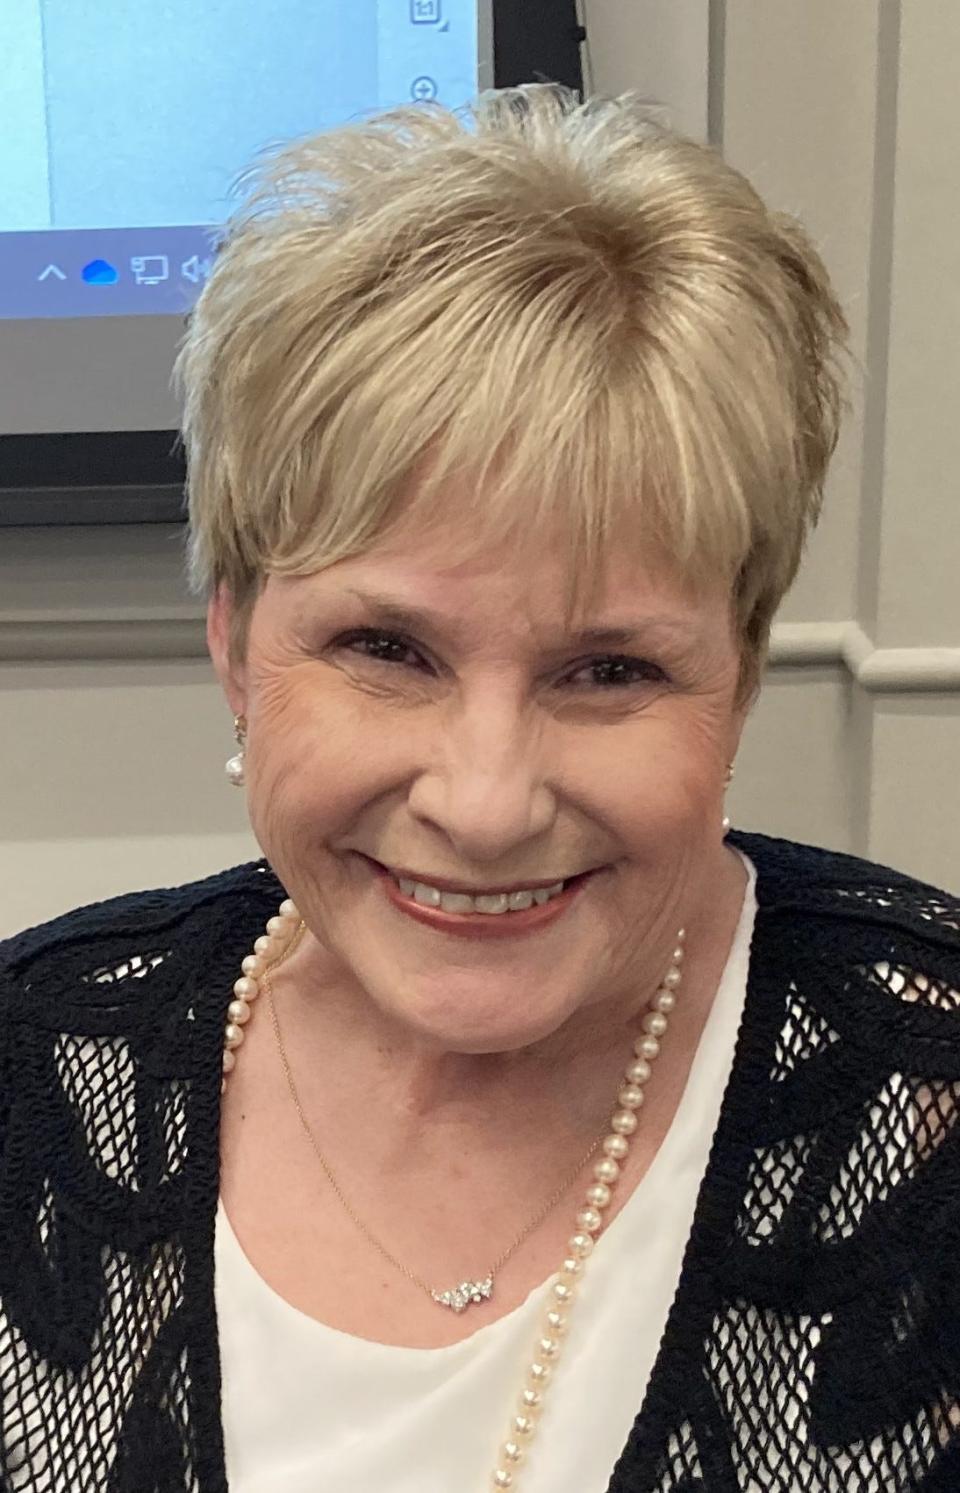 Shelia Bratton is selected as the new chairwoman for the Rutherford County Board of Education on Tuesday, Sept. 5, 2023. Bratton replaces Tammy Sharp.